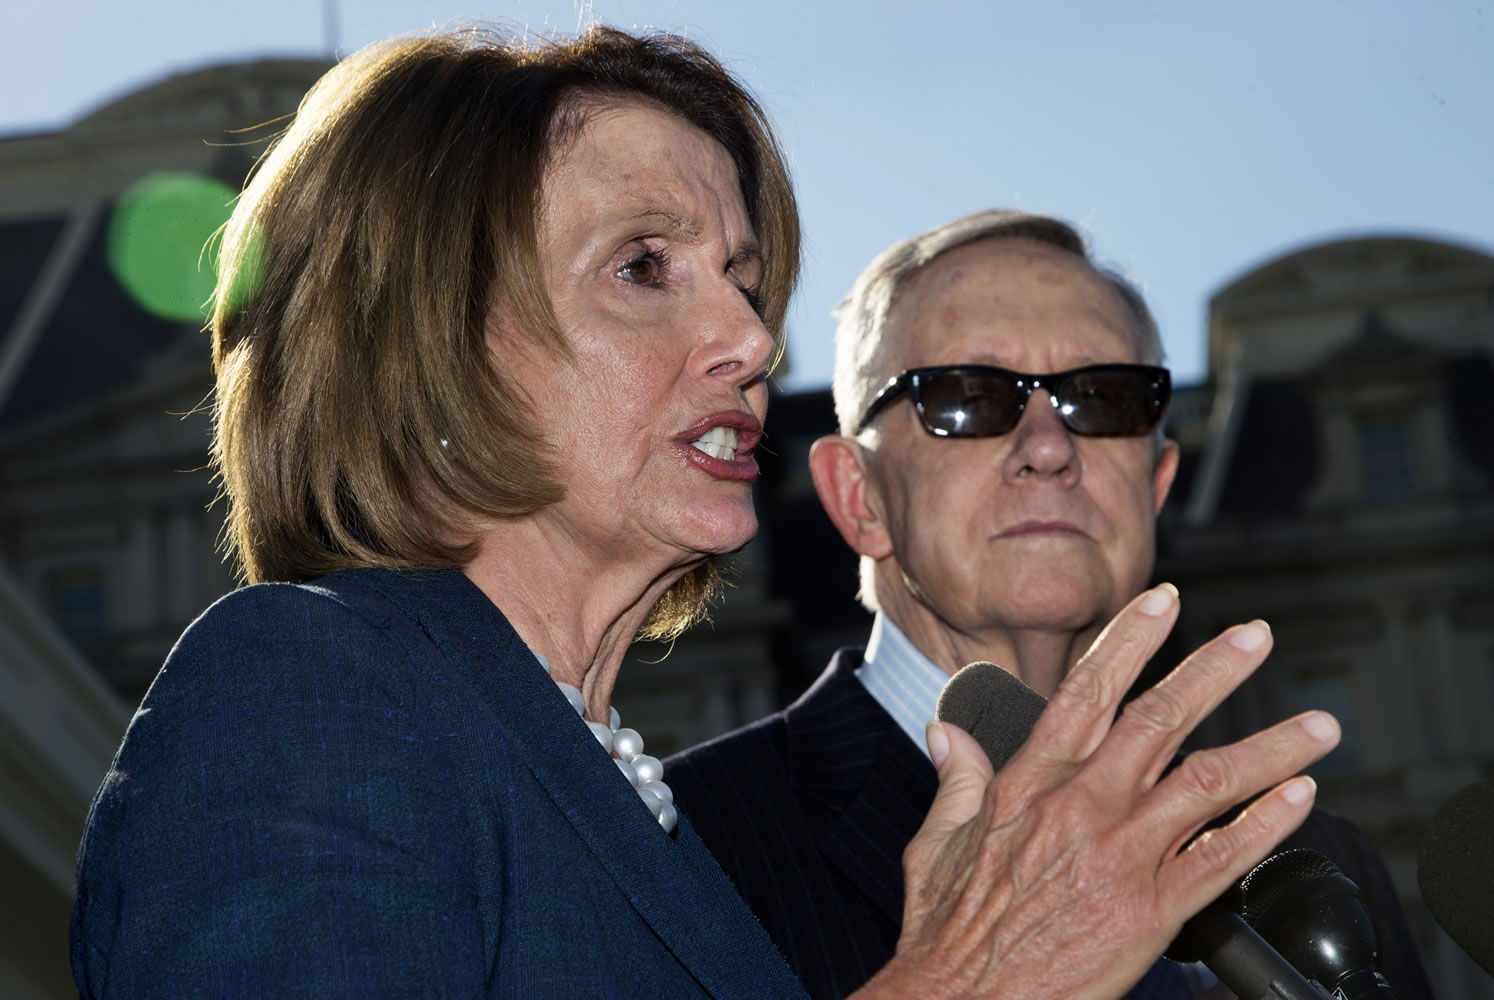 House Minority Leader Nancy Pelosi of California, left, accompanied by Senate Minority Leader Harry Reid of Nevada, speaks to reporters outside the West Wing of the White House in Washington on Thursday after a meeting with President Barack Obama.